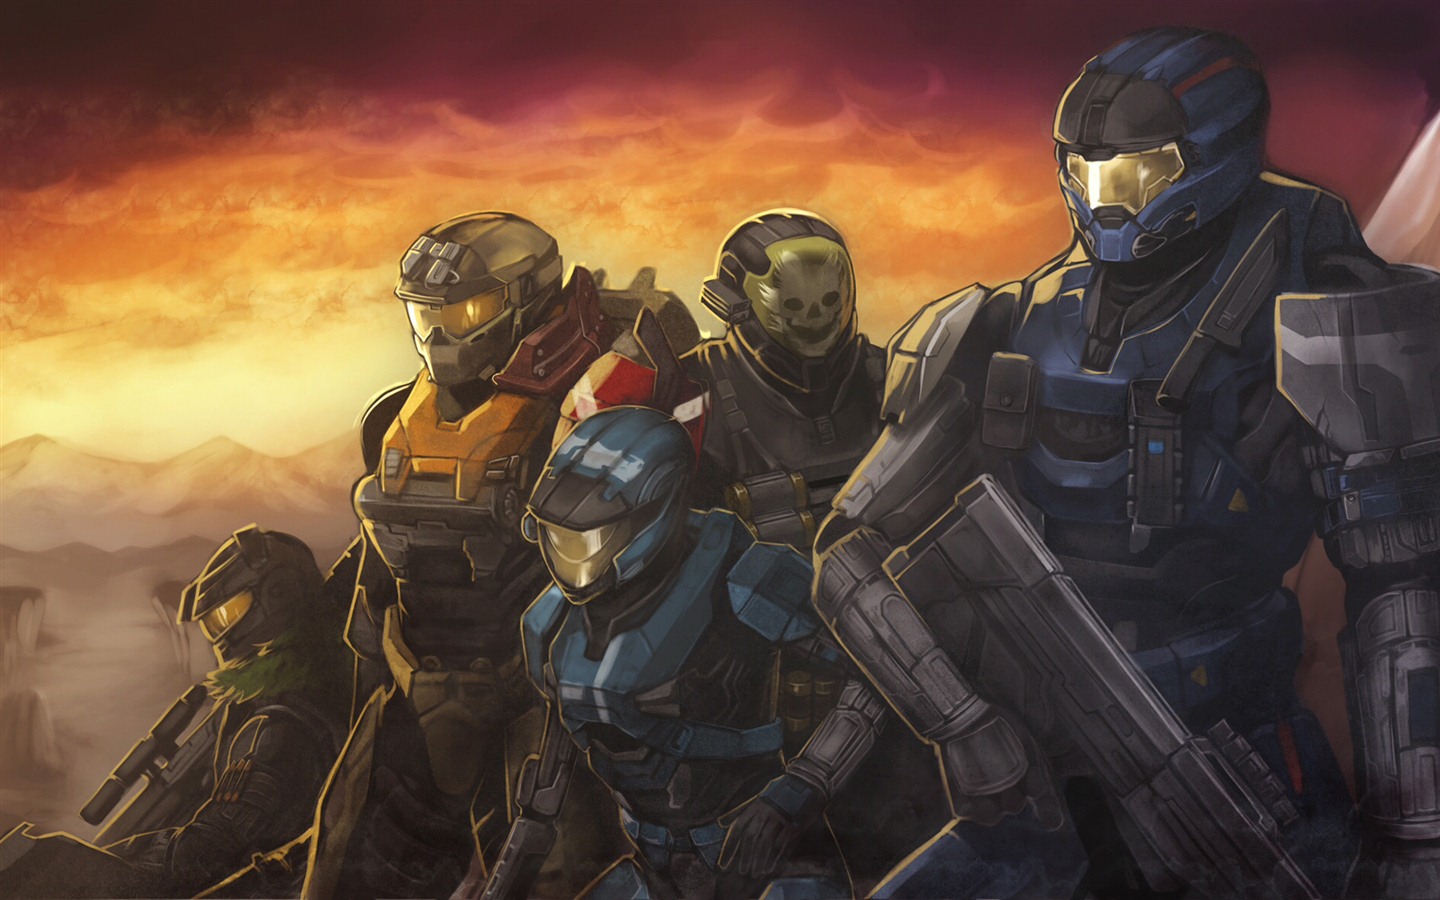 Halo game HD wallpapers #20 - 1440x900